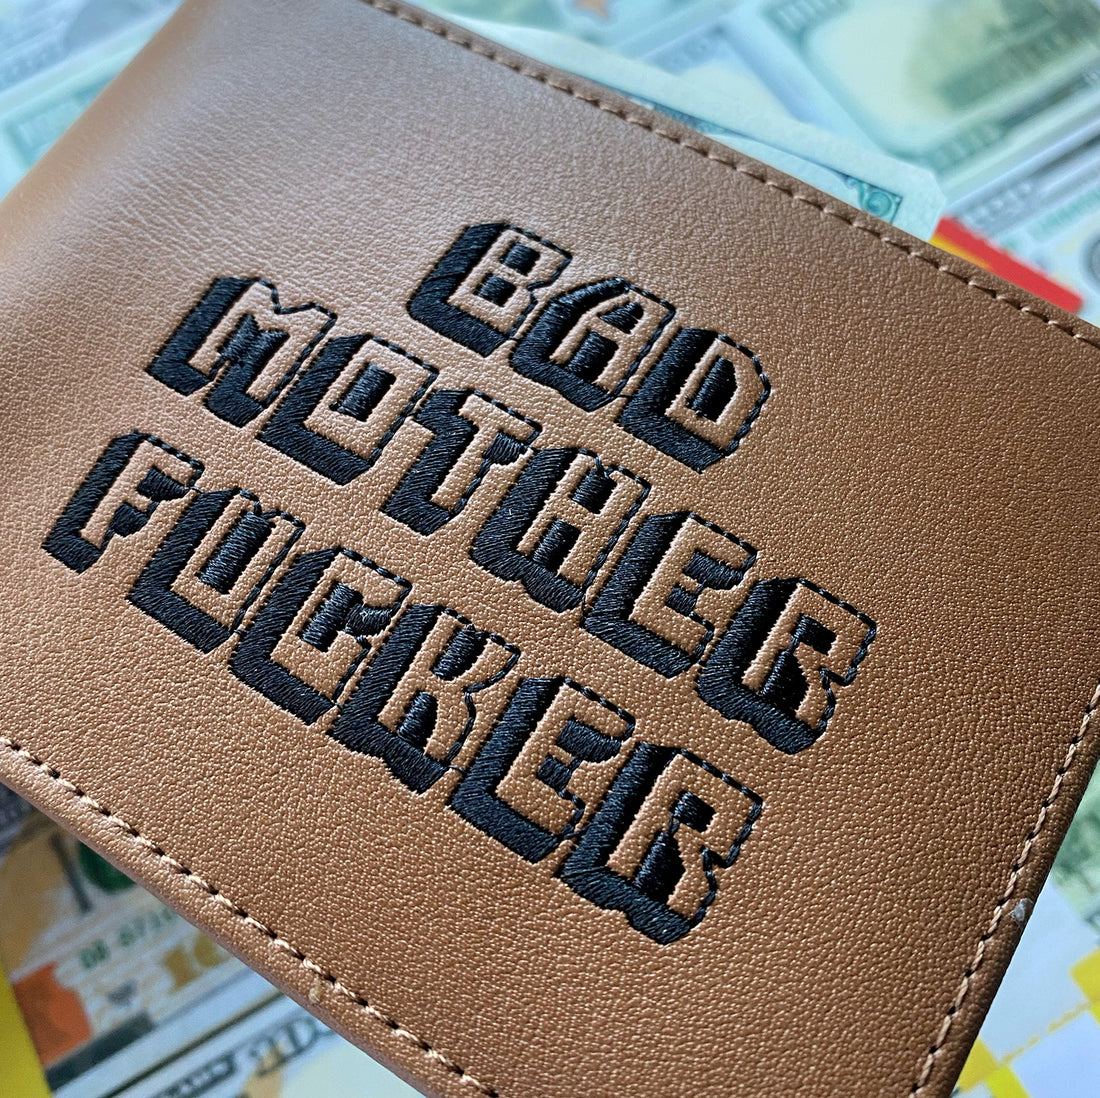 PULP FICTION BAD MOTHER F**KER EMBROIDERED BROWN LEATHER WALLET OFFICIAL